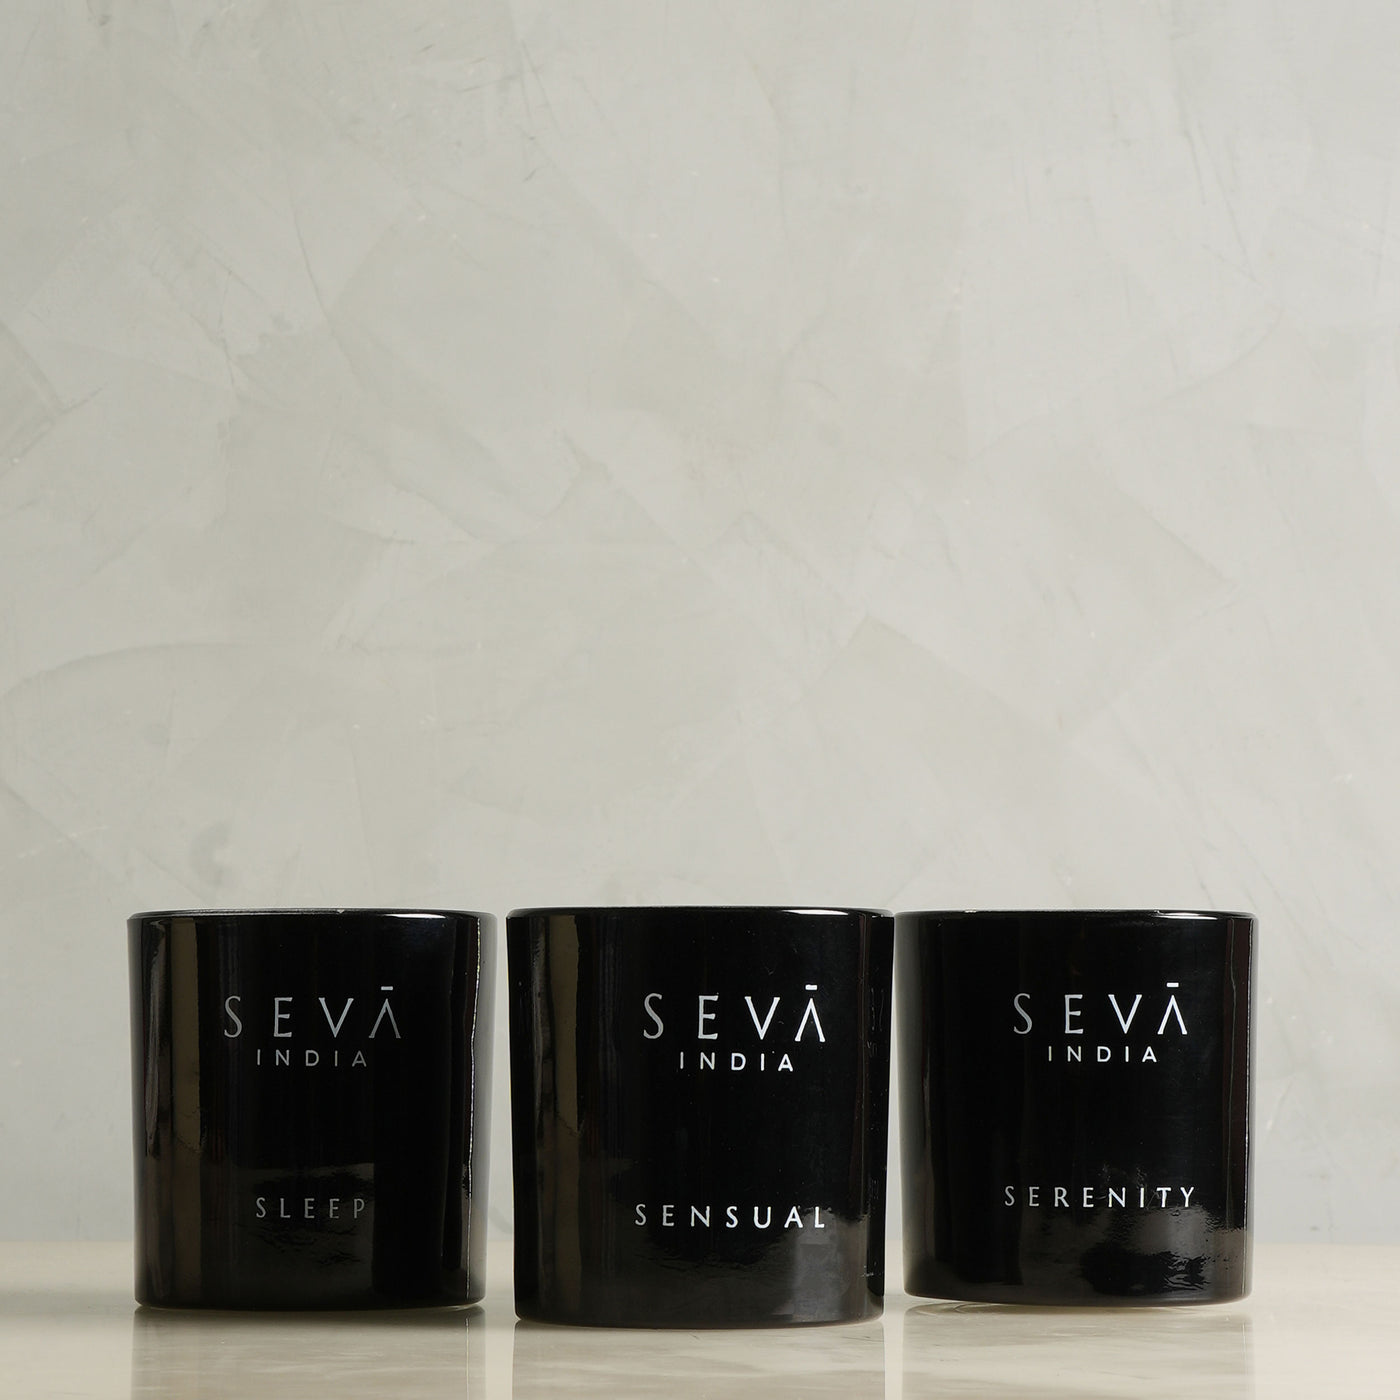 SEVA INDIA Set of 3 Soy Candles with different moods- Sleep, Sensual, Serenity